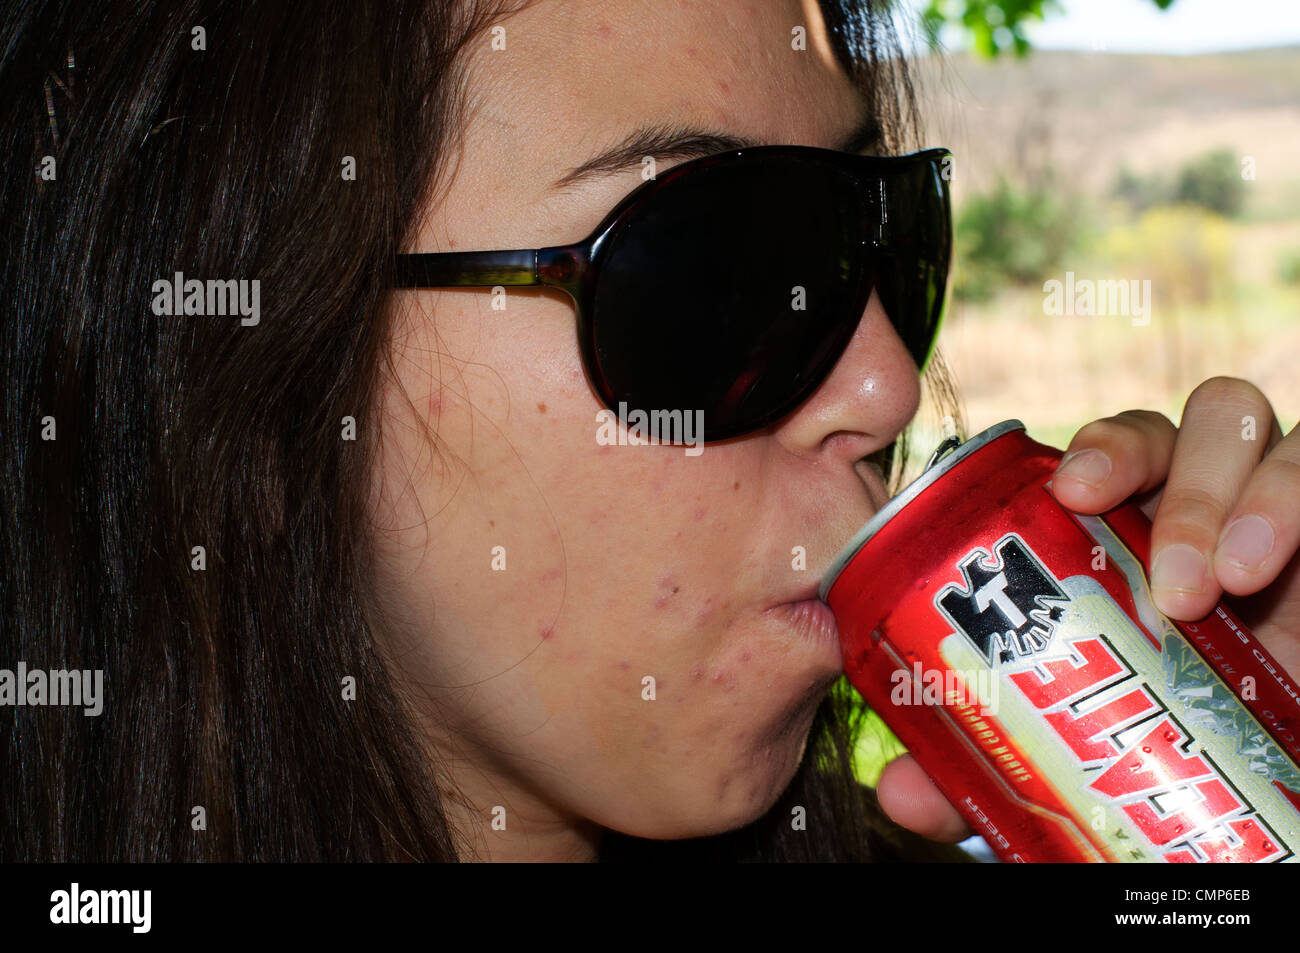 Young hispanic woman drinking a can of Tecate beer in a ranch environment Stock Photo